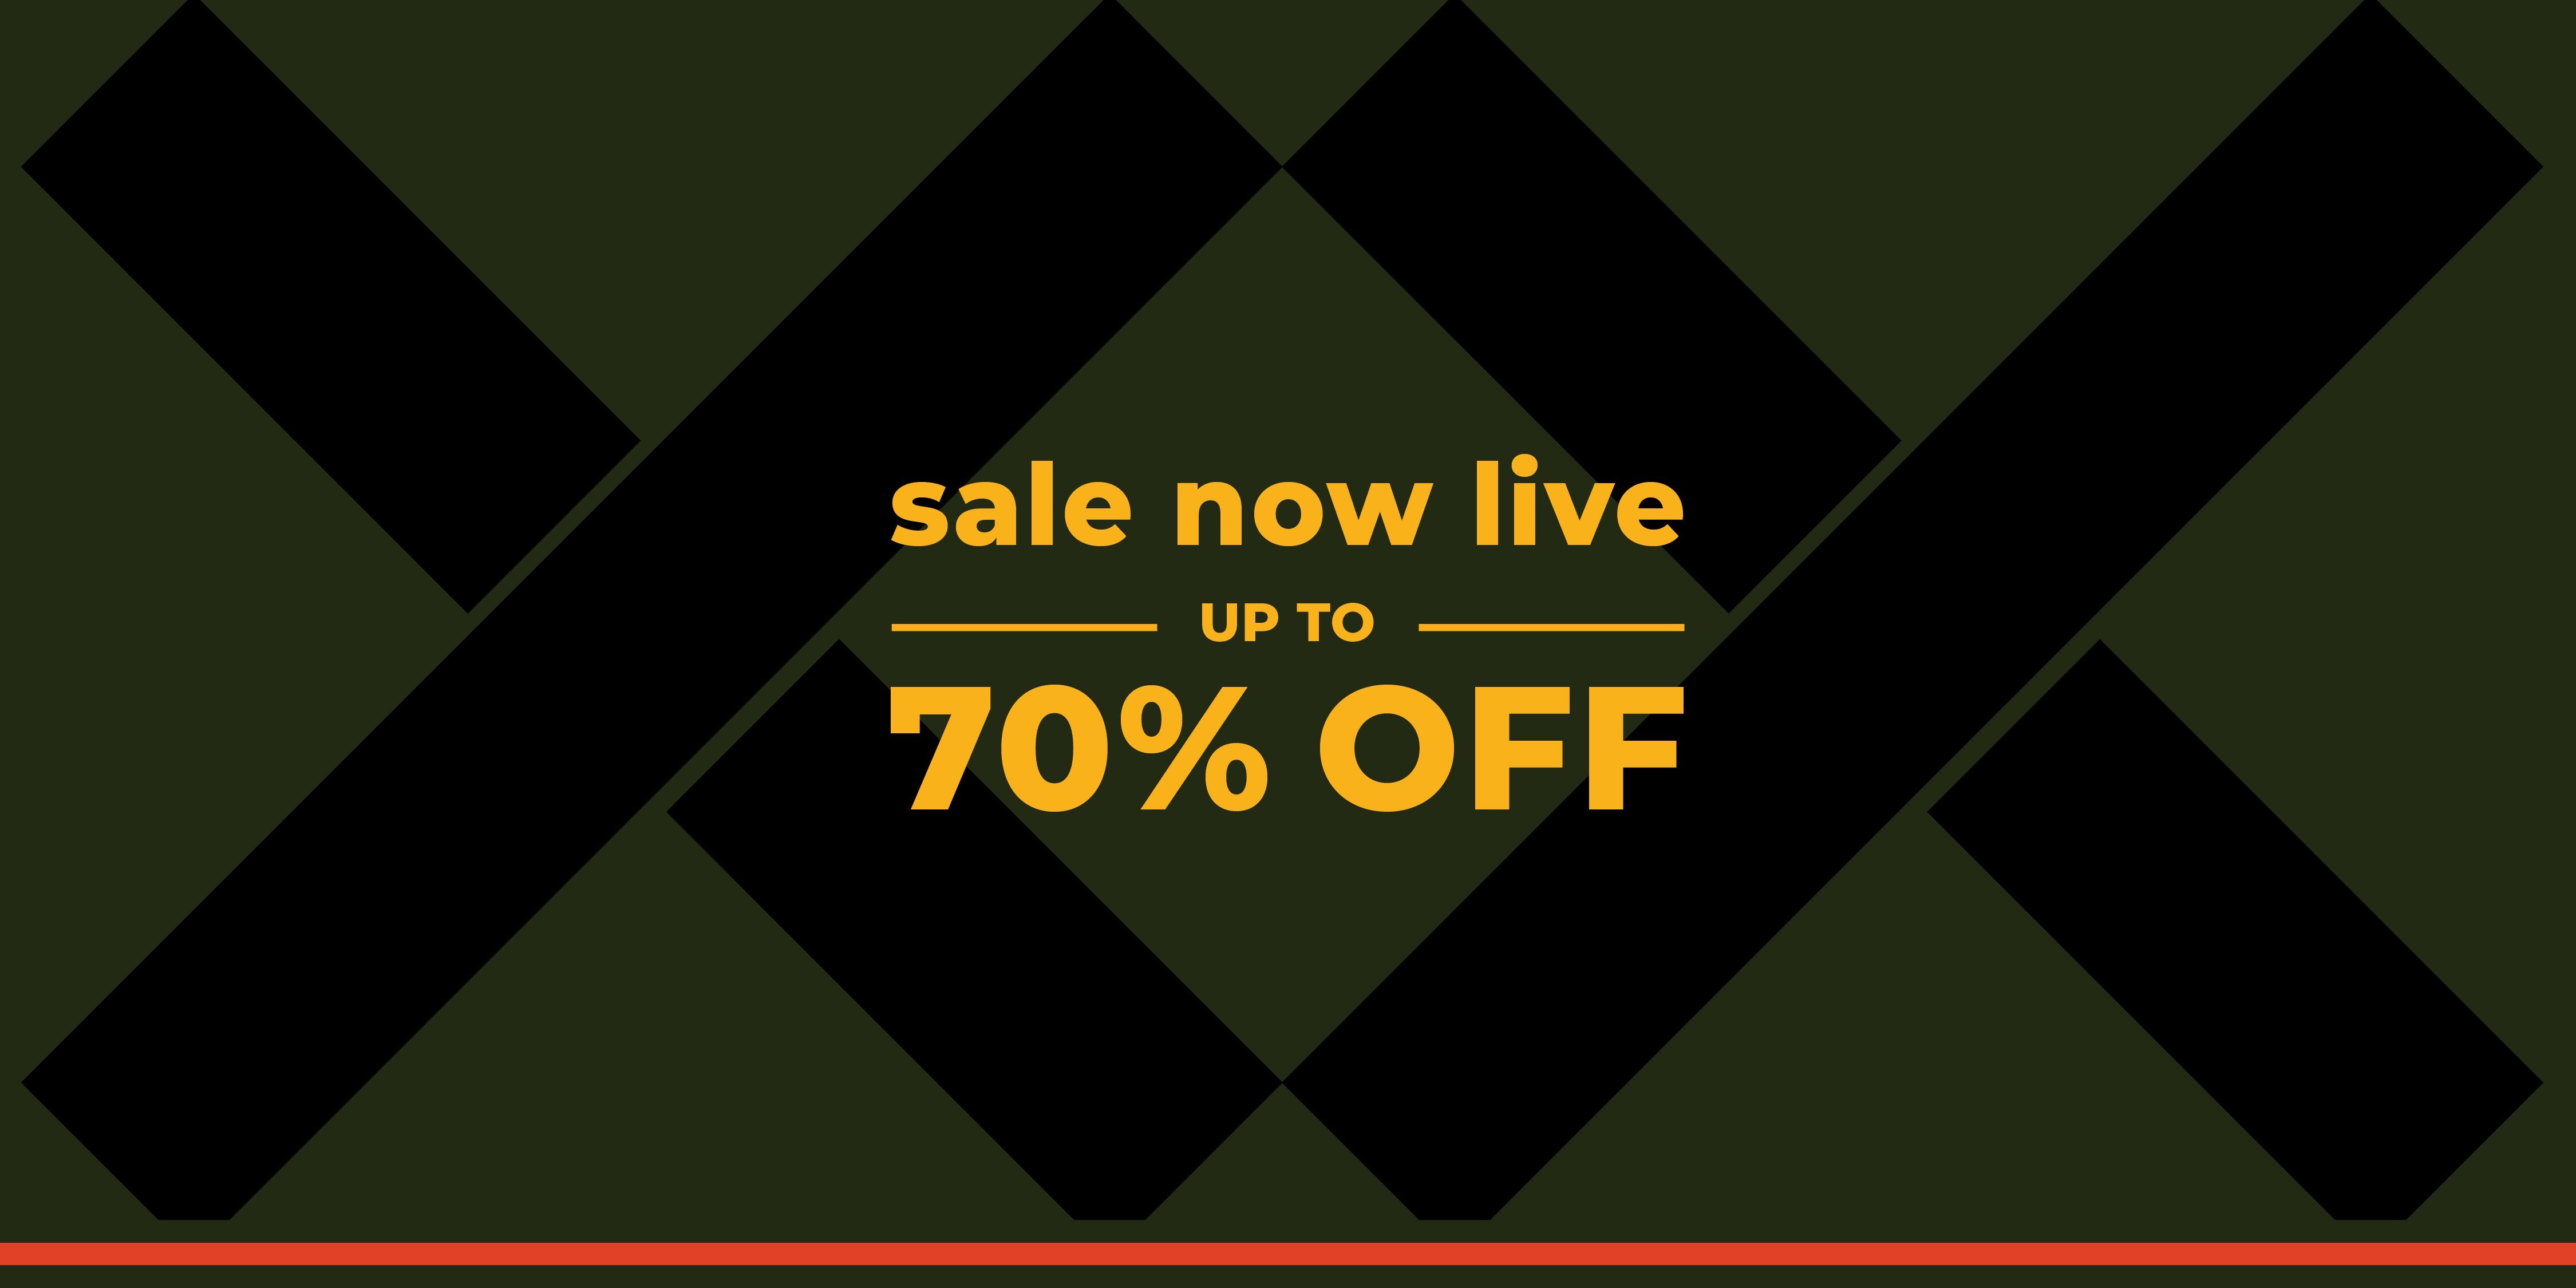 Sale now live up to 70% off